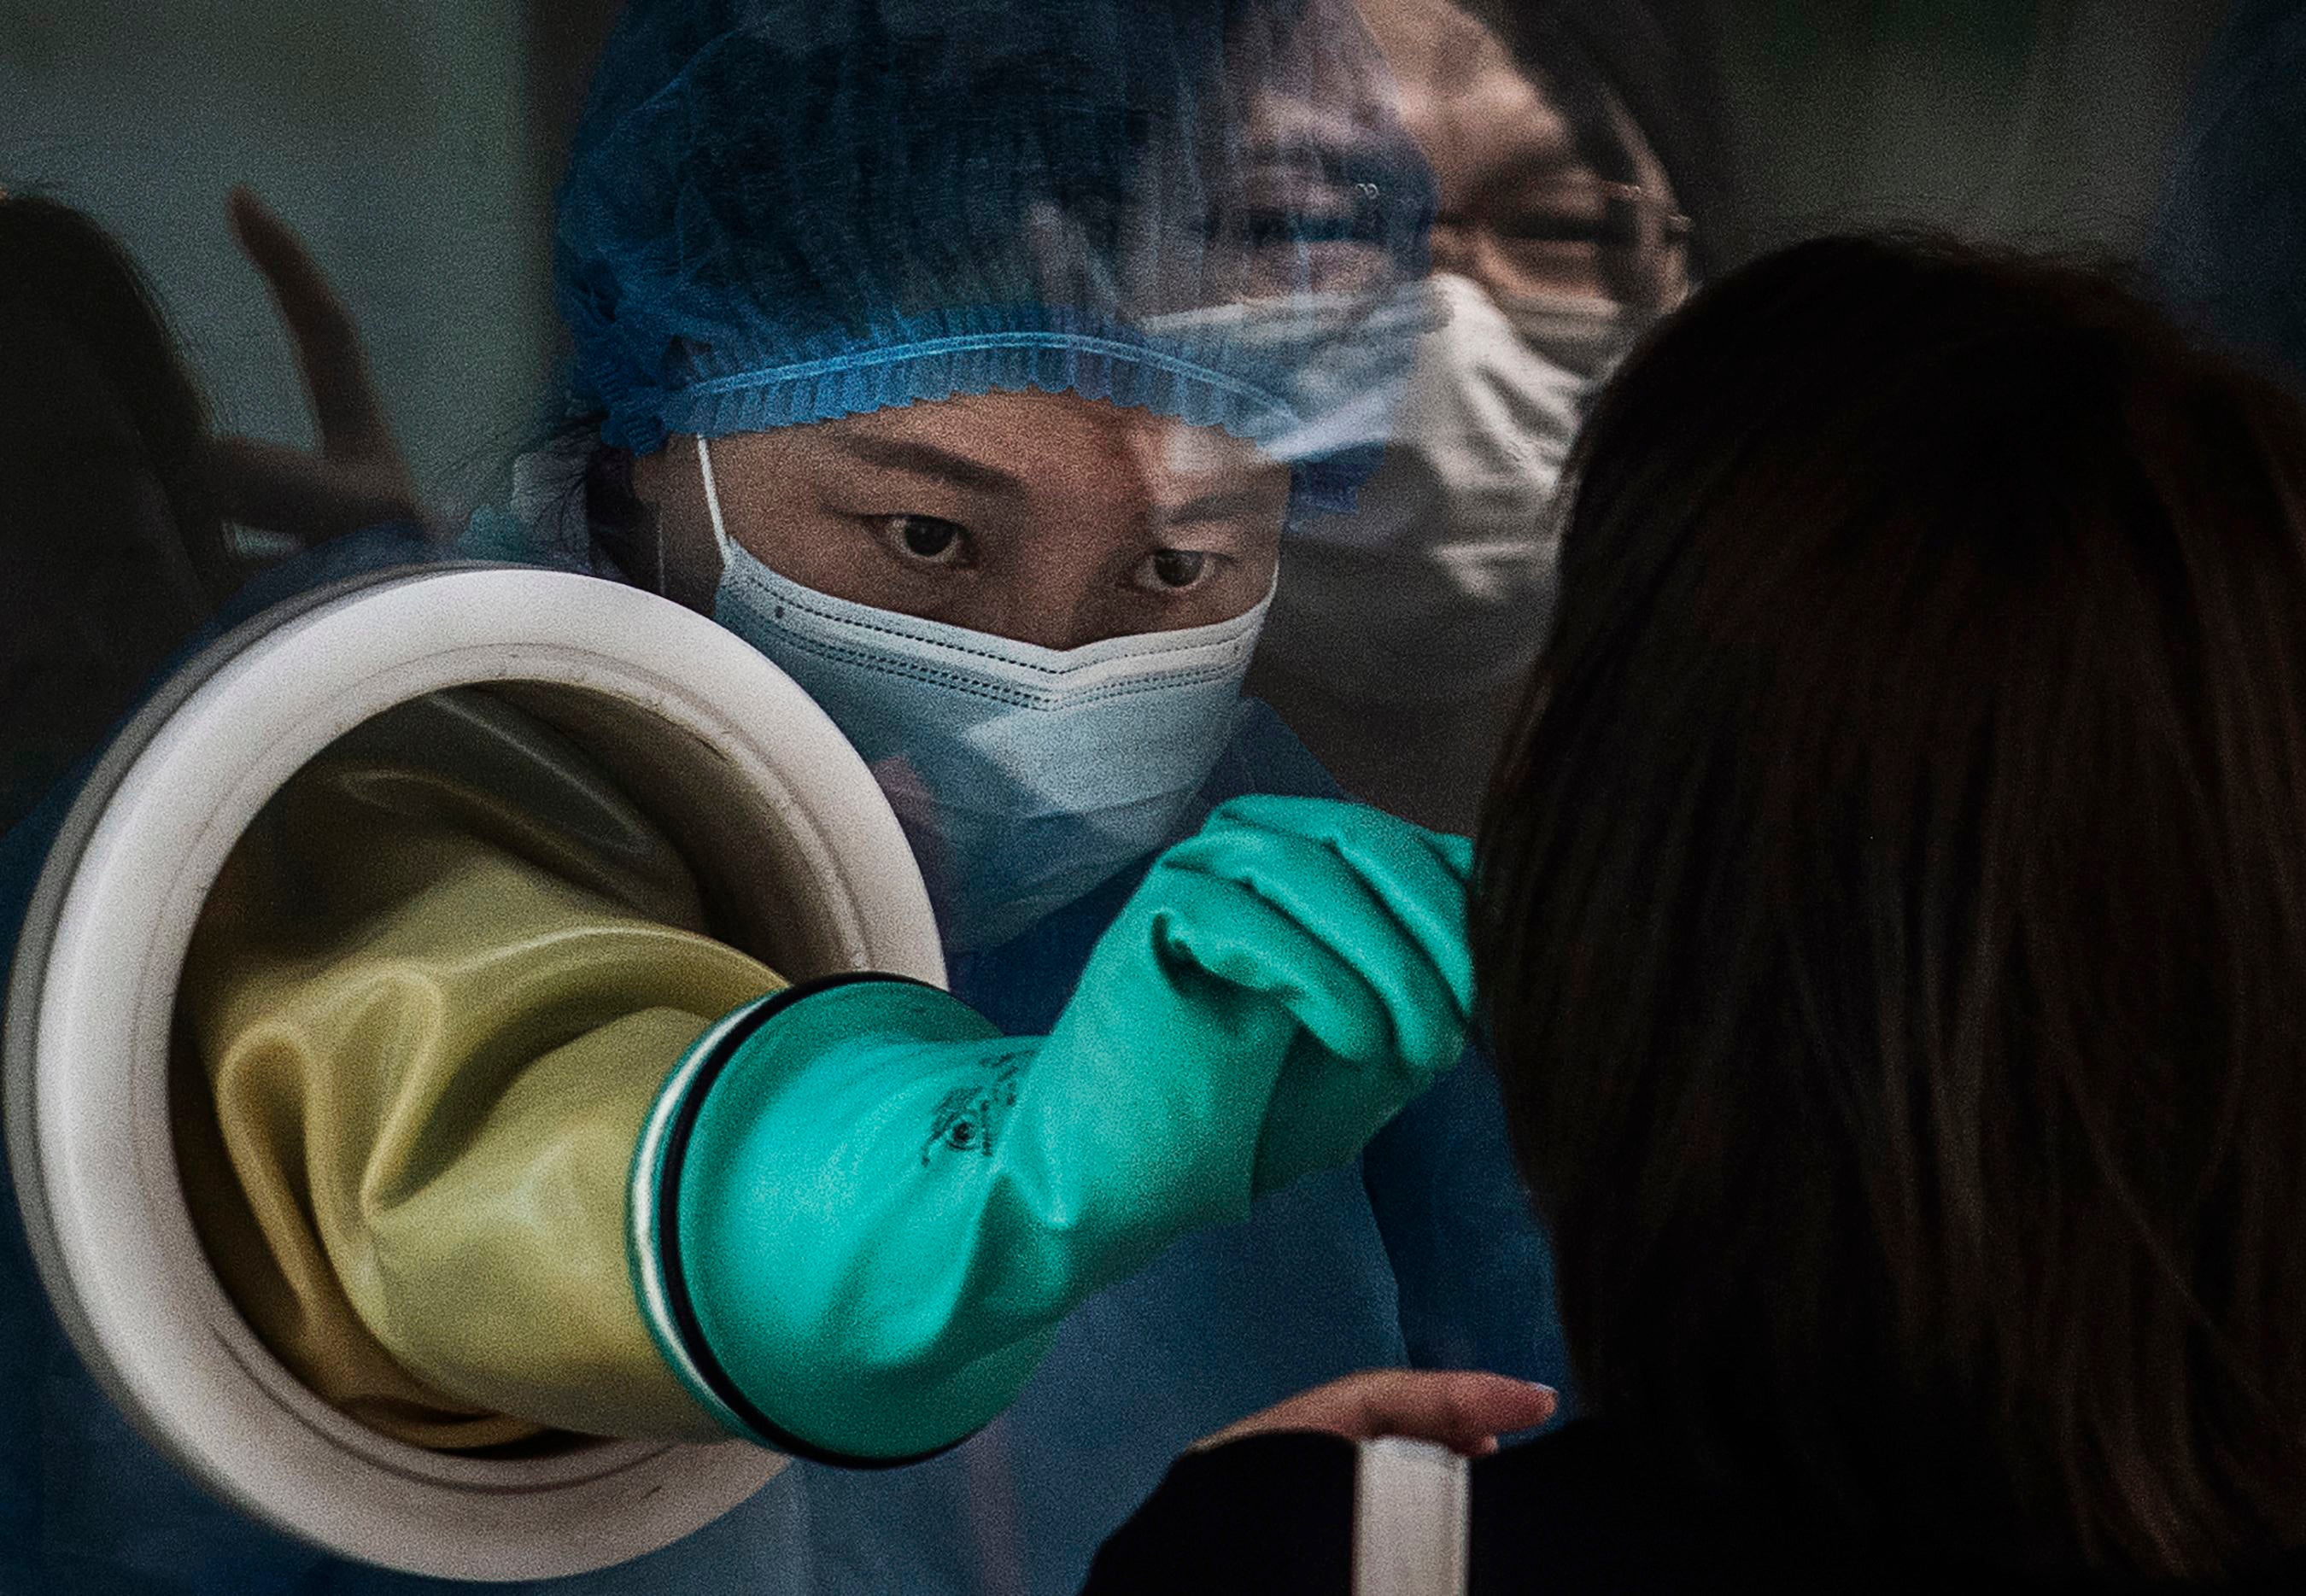 China is trying to figure out a long-term strategy to contain the pandemic